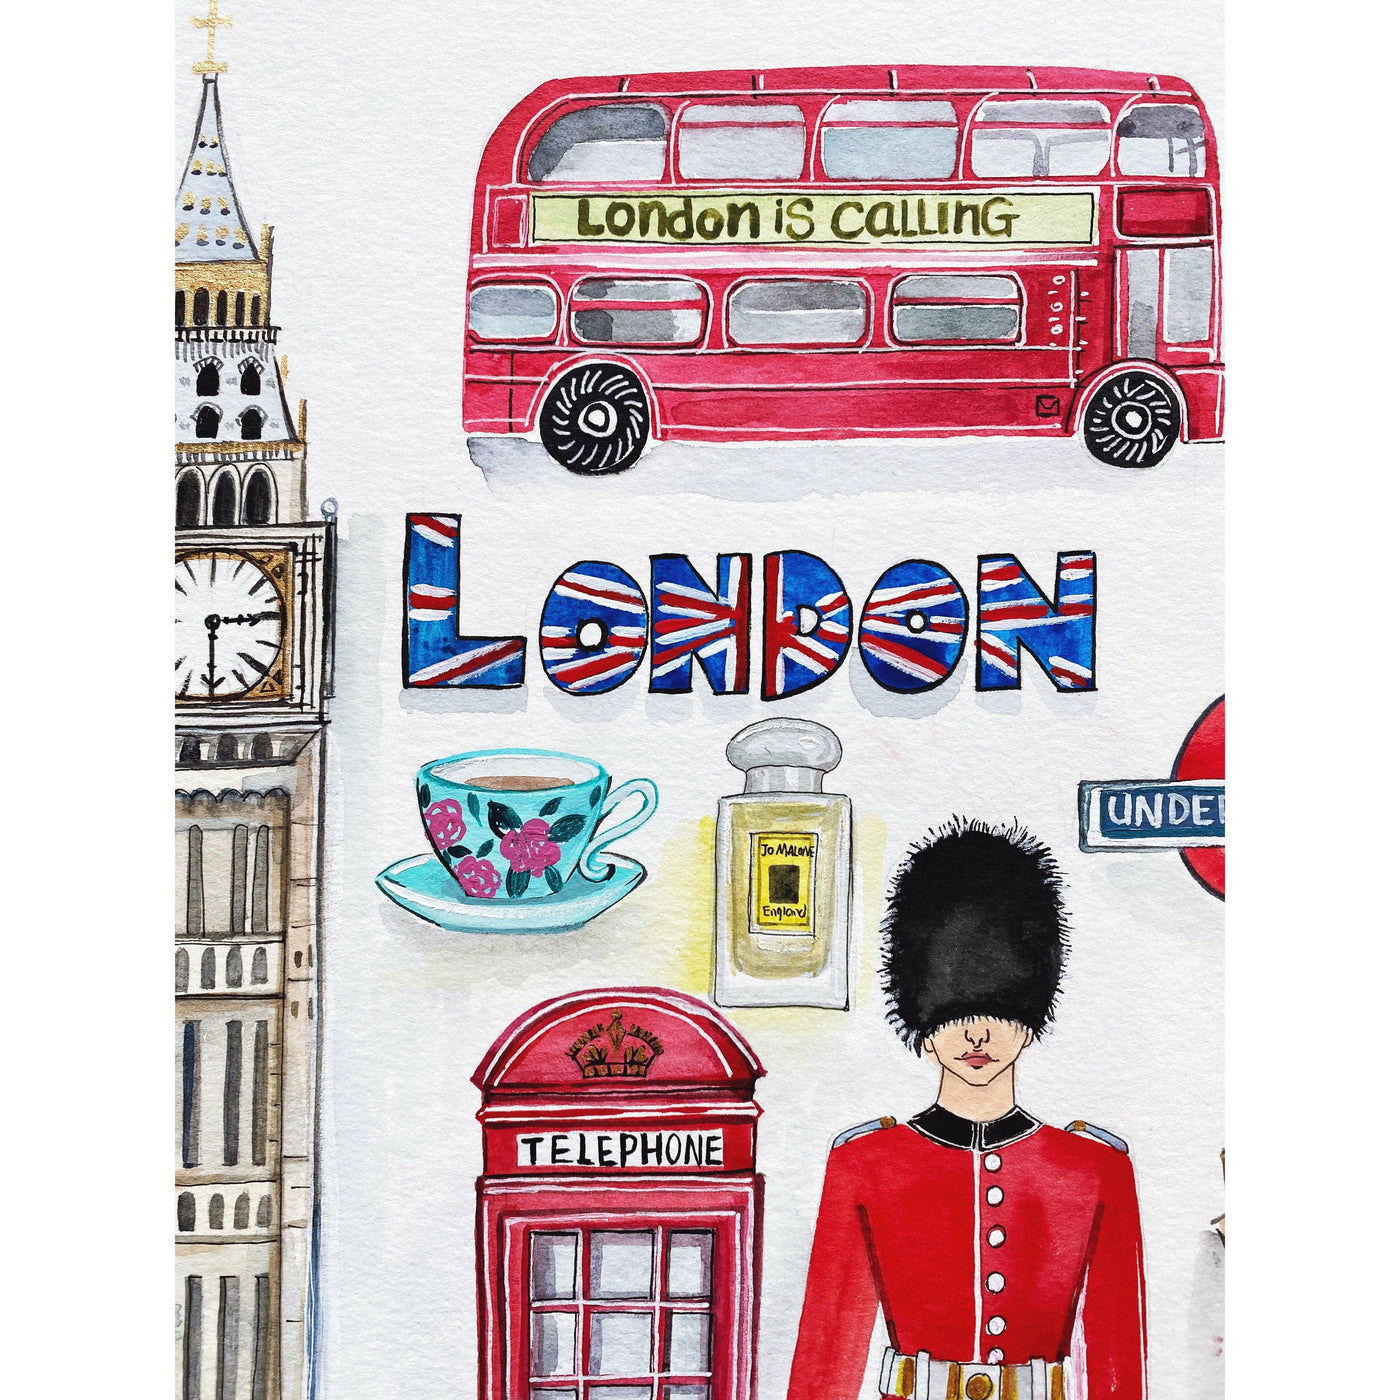 LONDON IS CALLING by Rongrong DeVoe- Details